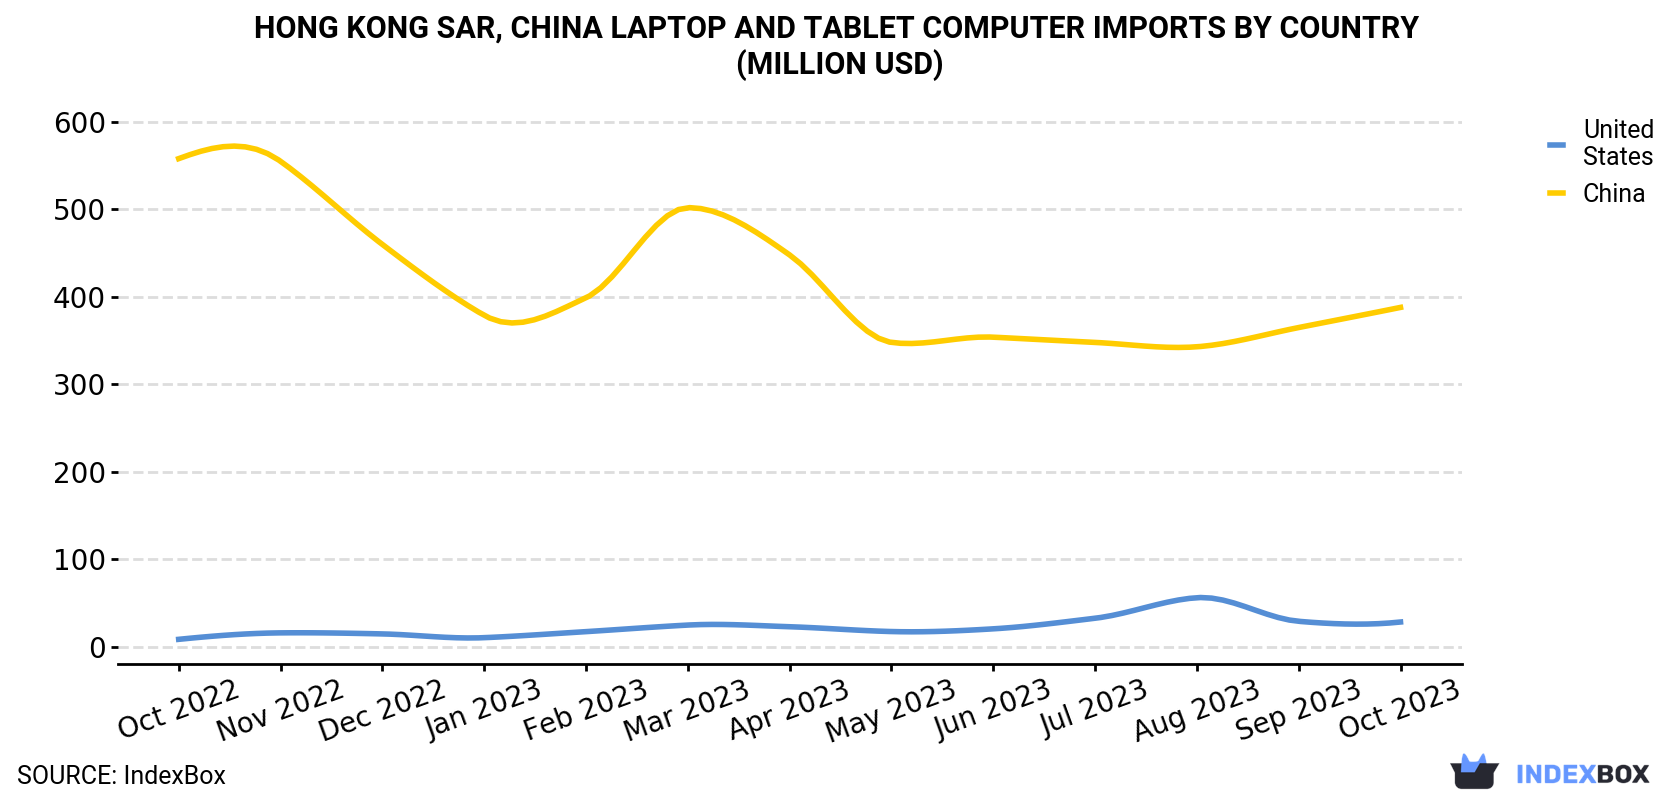 Hong Kong Laptop and Tablet Computer Imports By Country (Million USD)